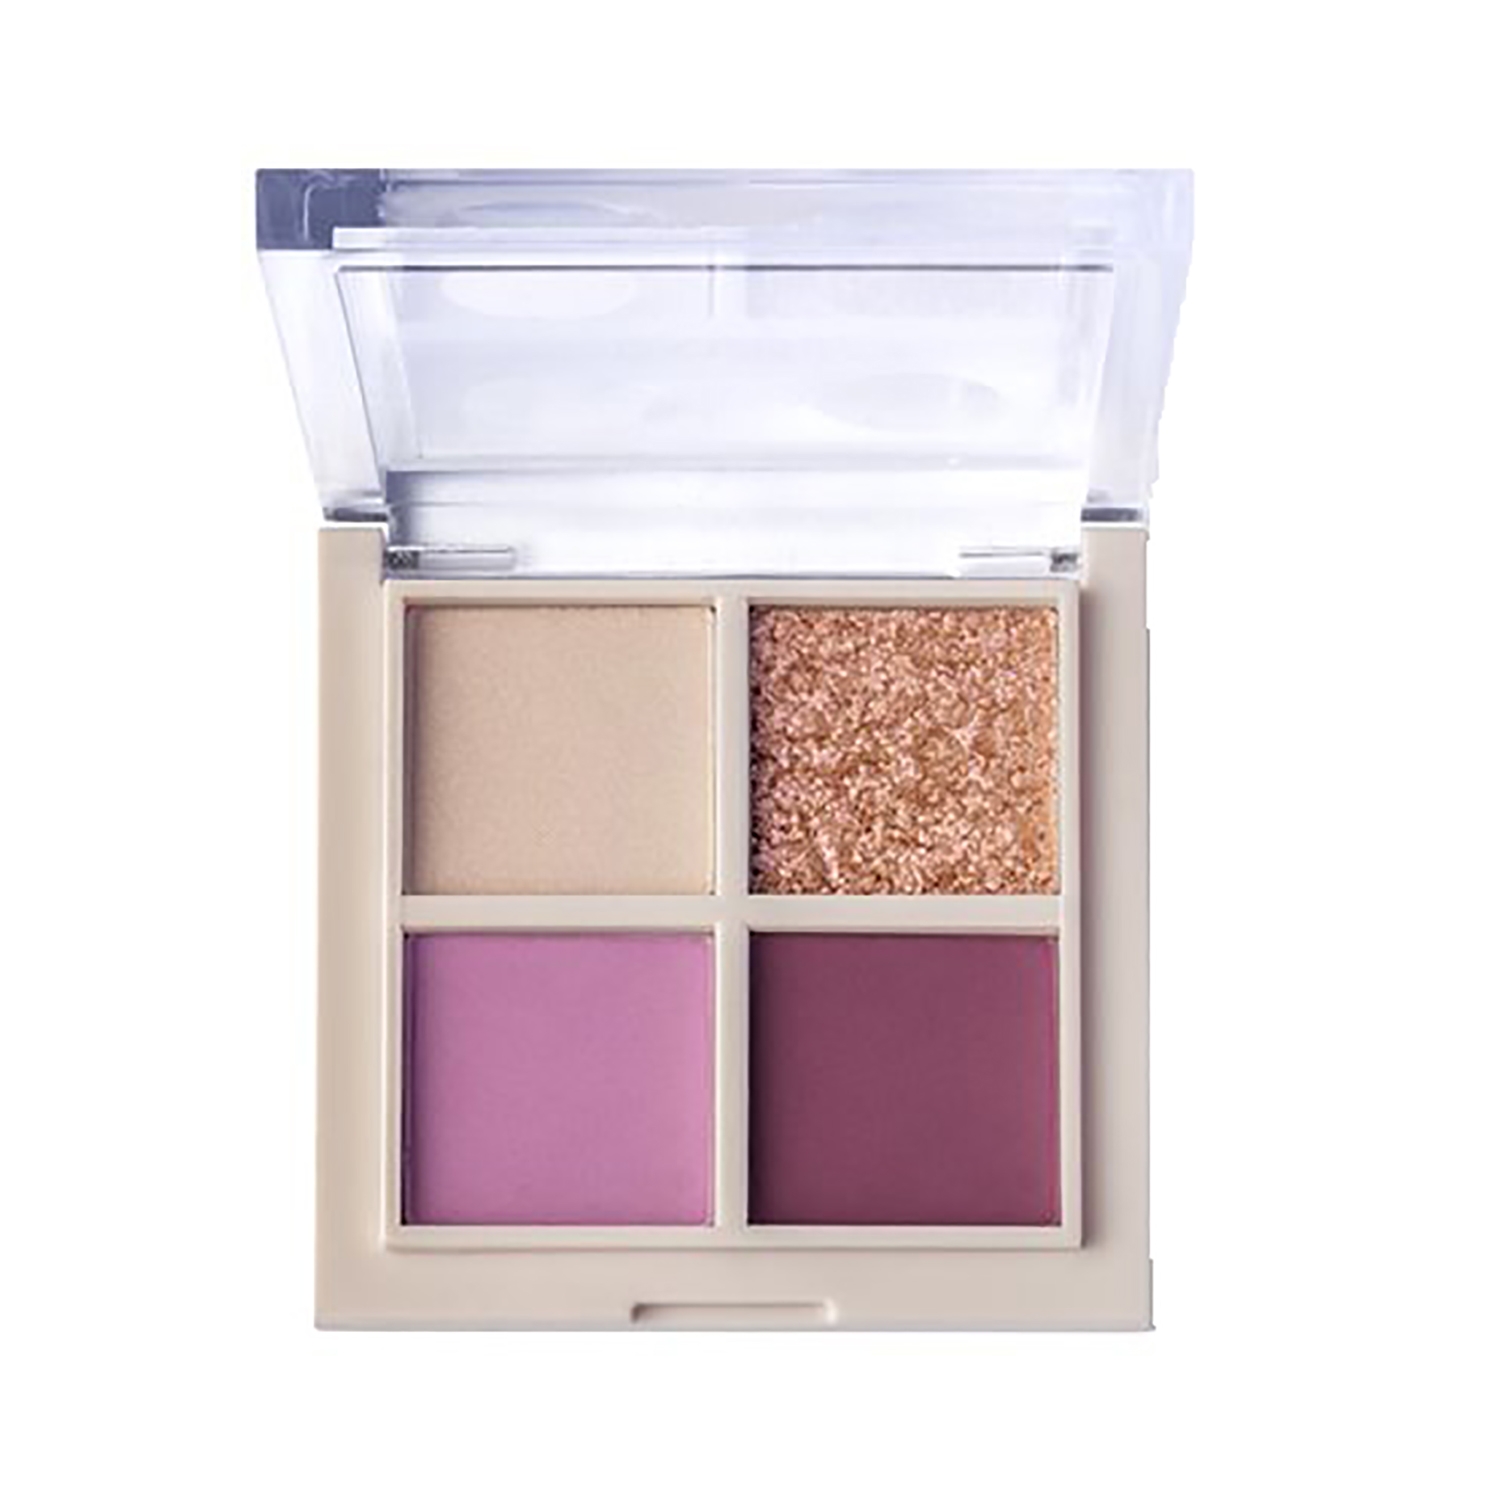 Paese Cosmetics | Paese Cosmetics Daily Vibe Eye Palette - 04 Tropical Orchid (5.5g)